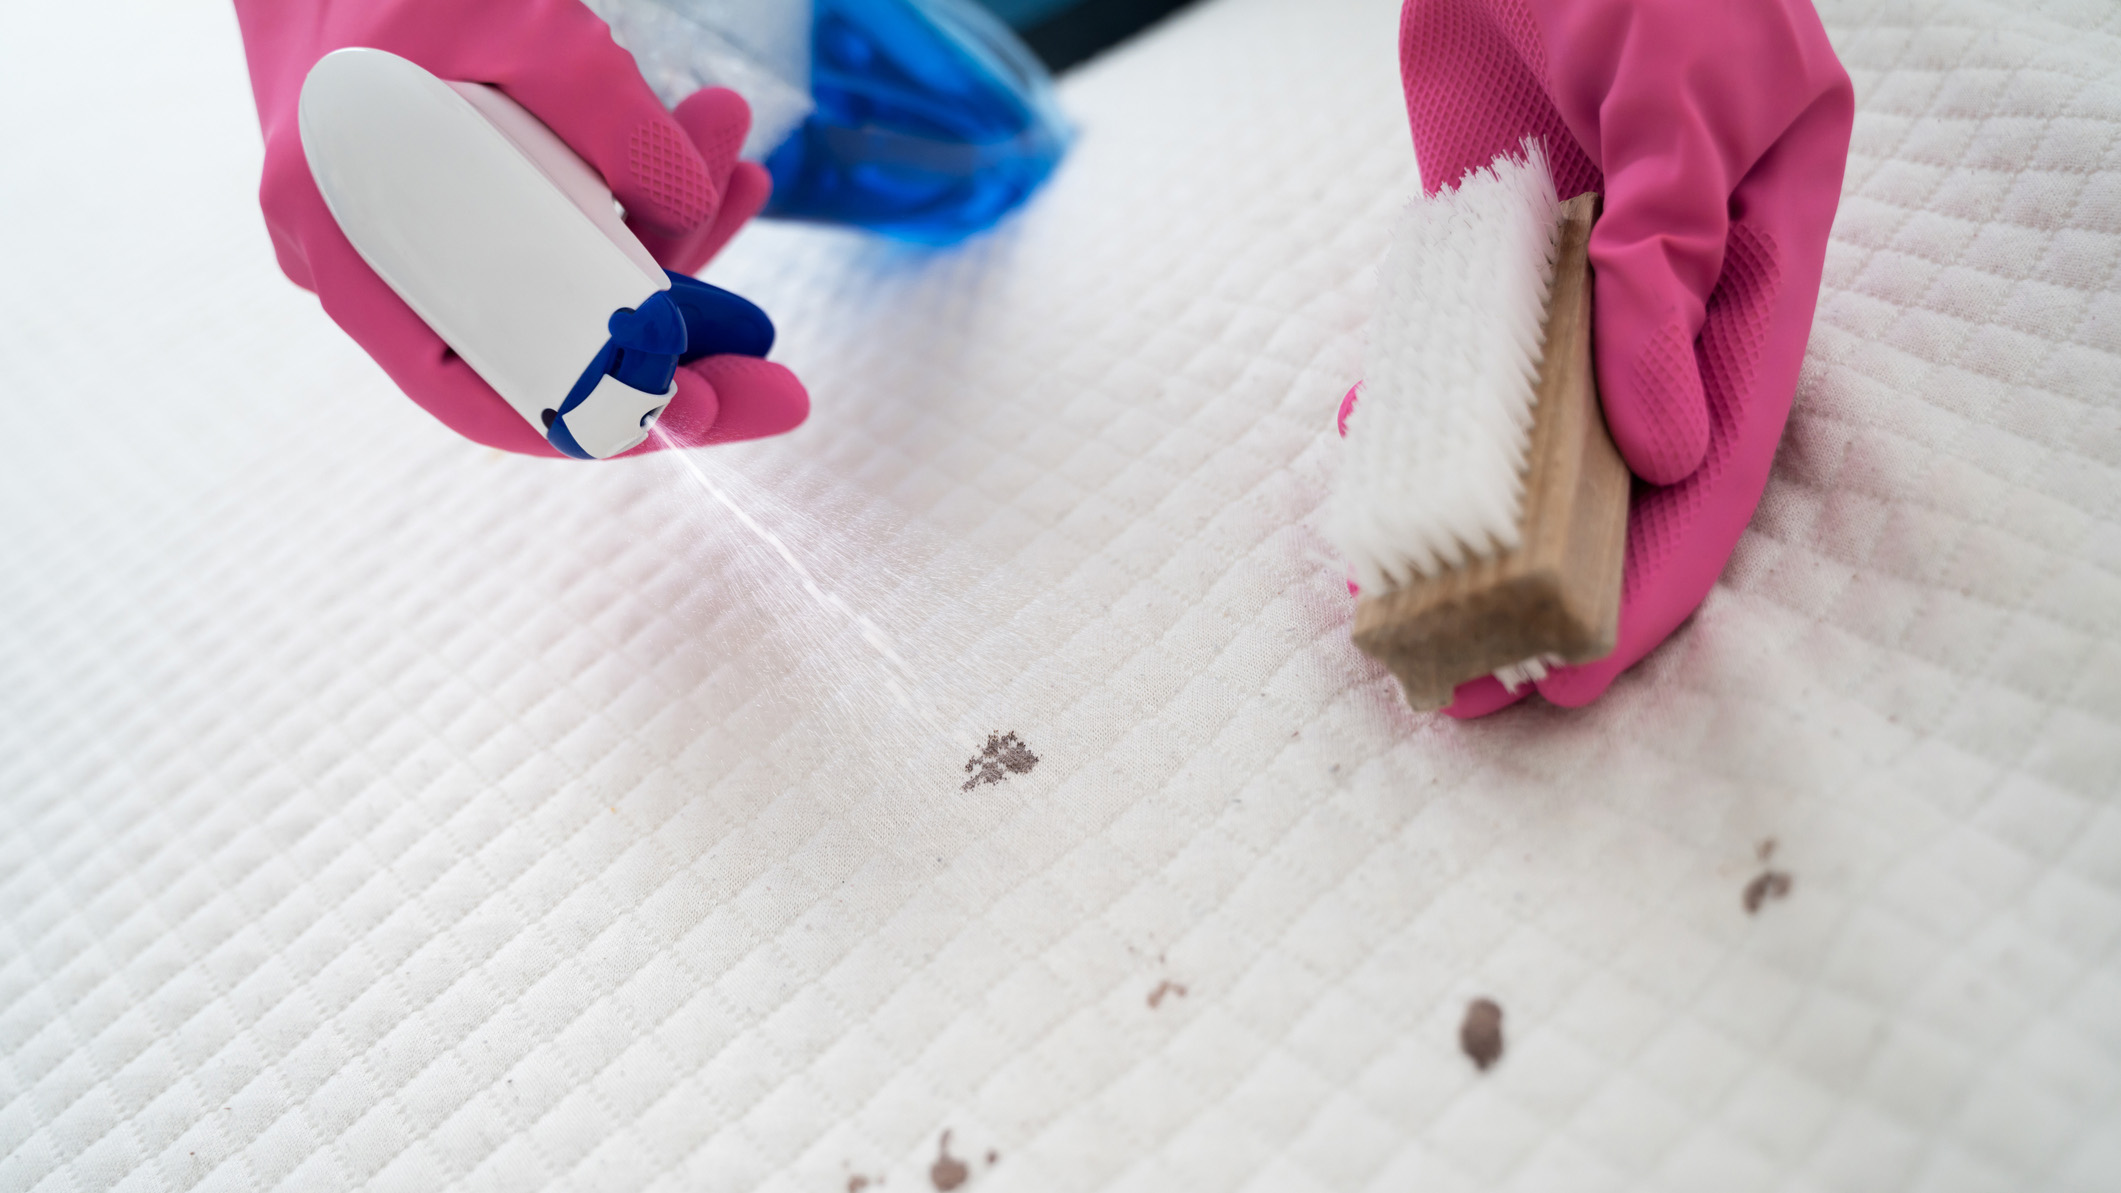 Cleaning a mattress with a brush to get rid of dried blood